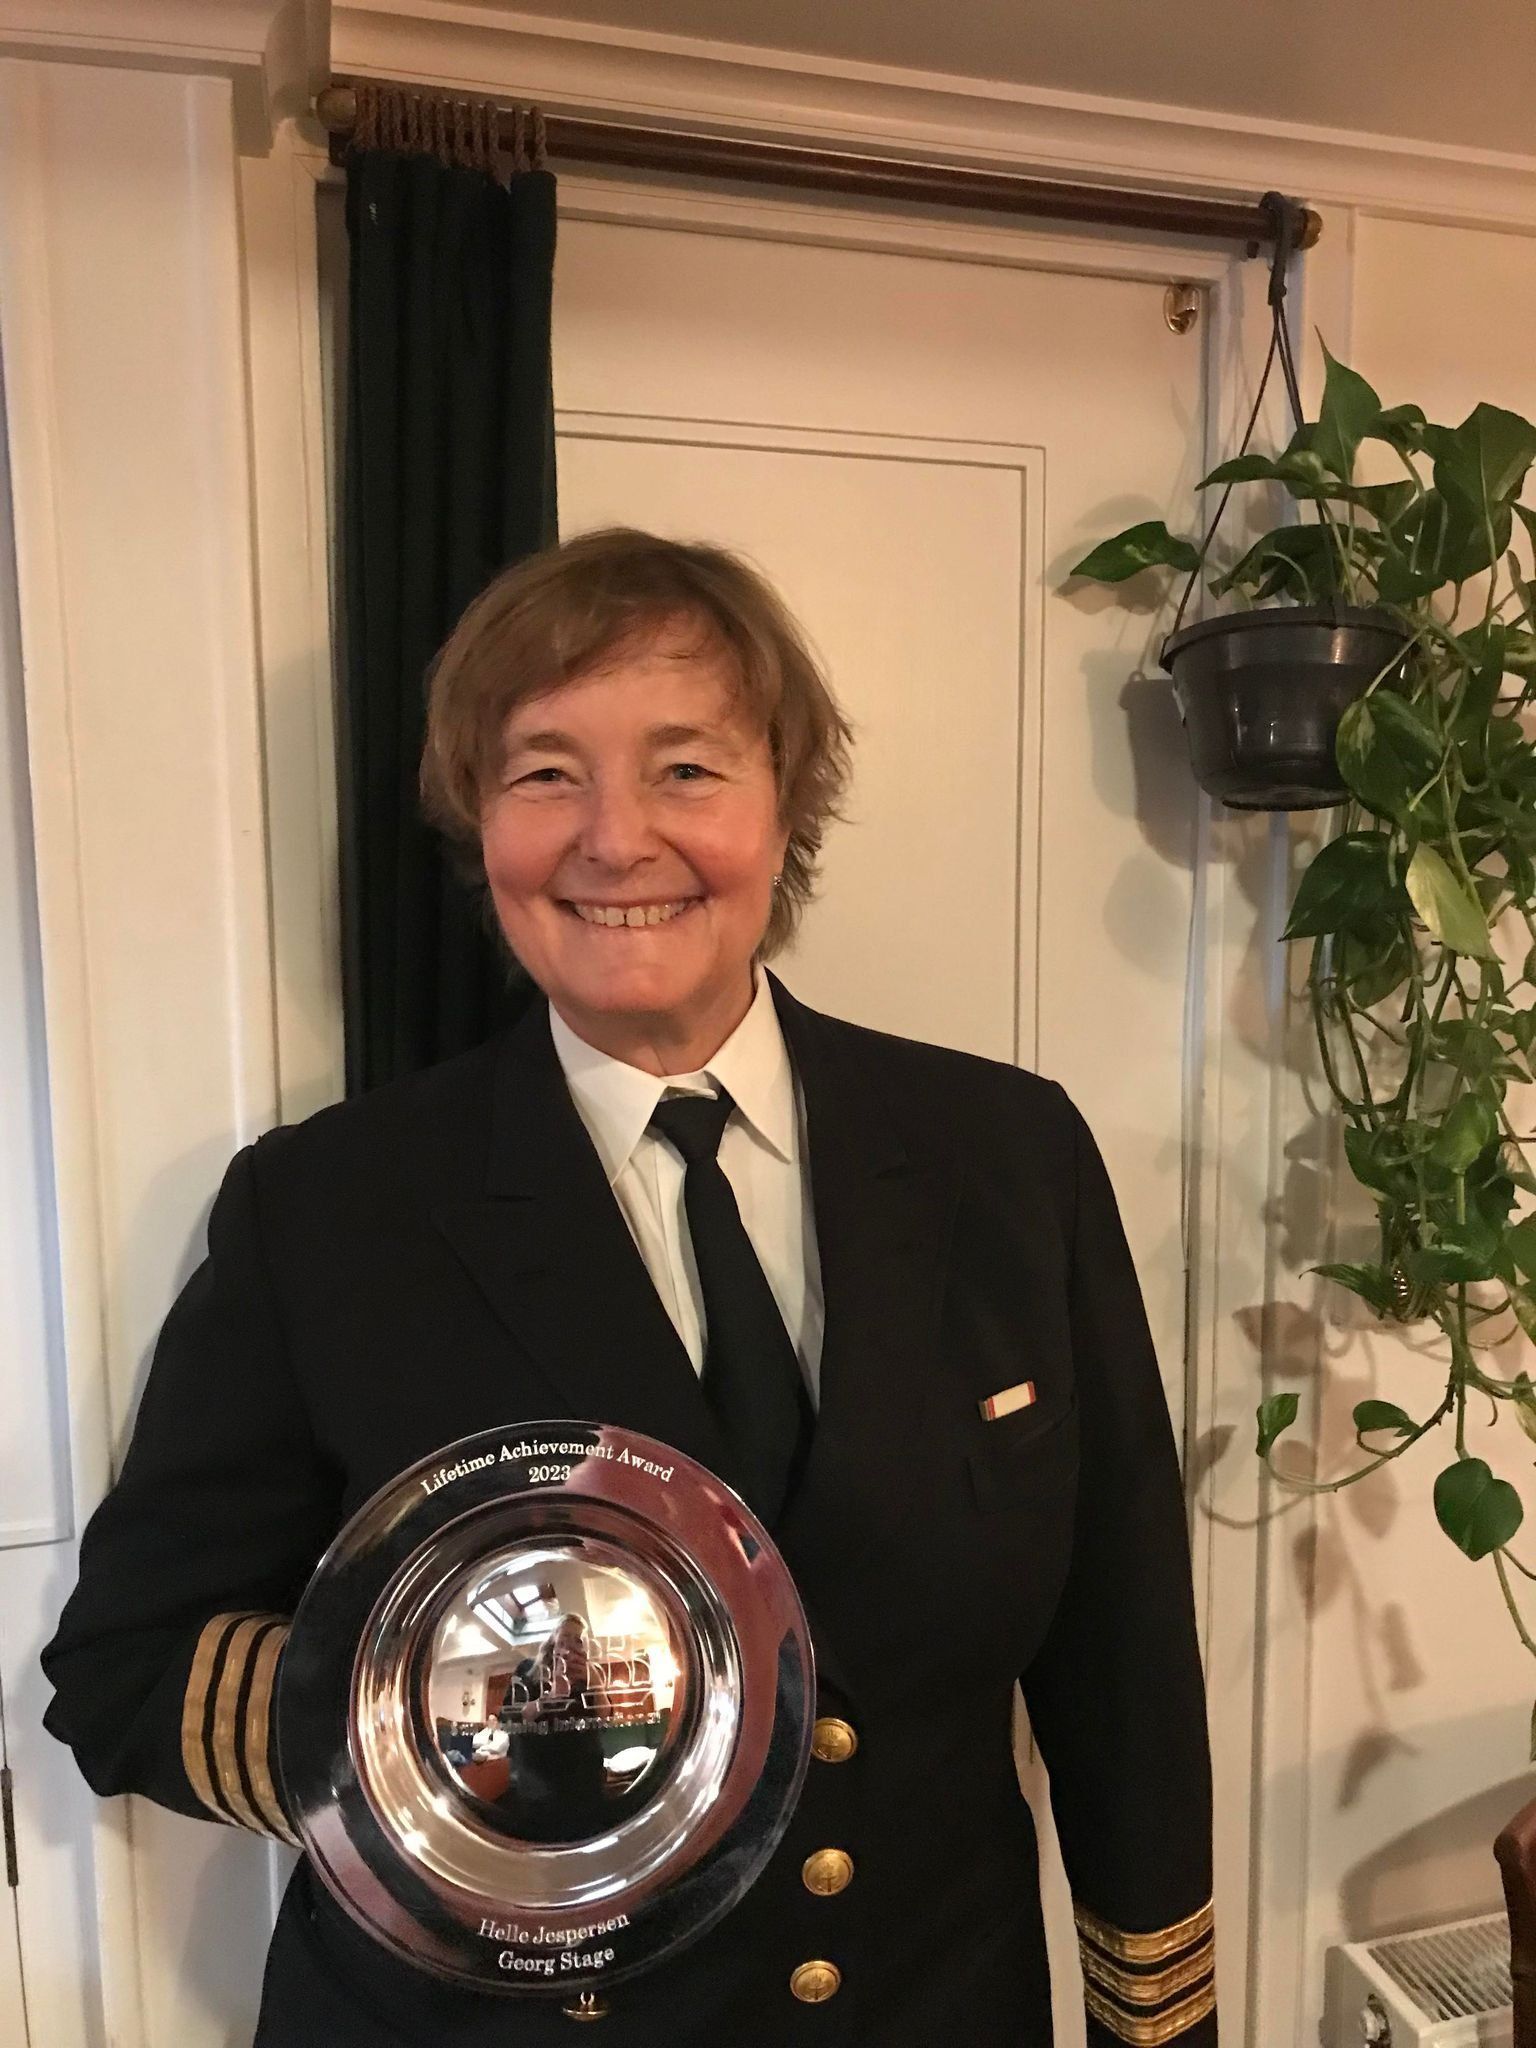 A woman in a suit and tie is holding a trophy.